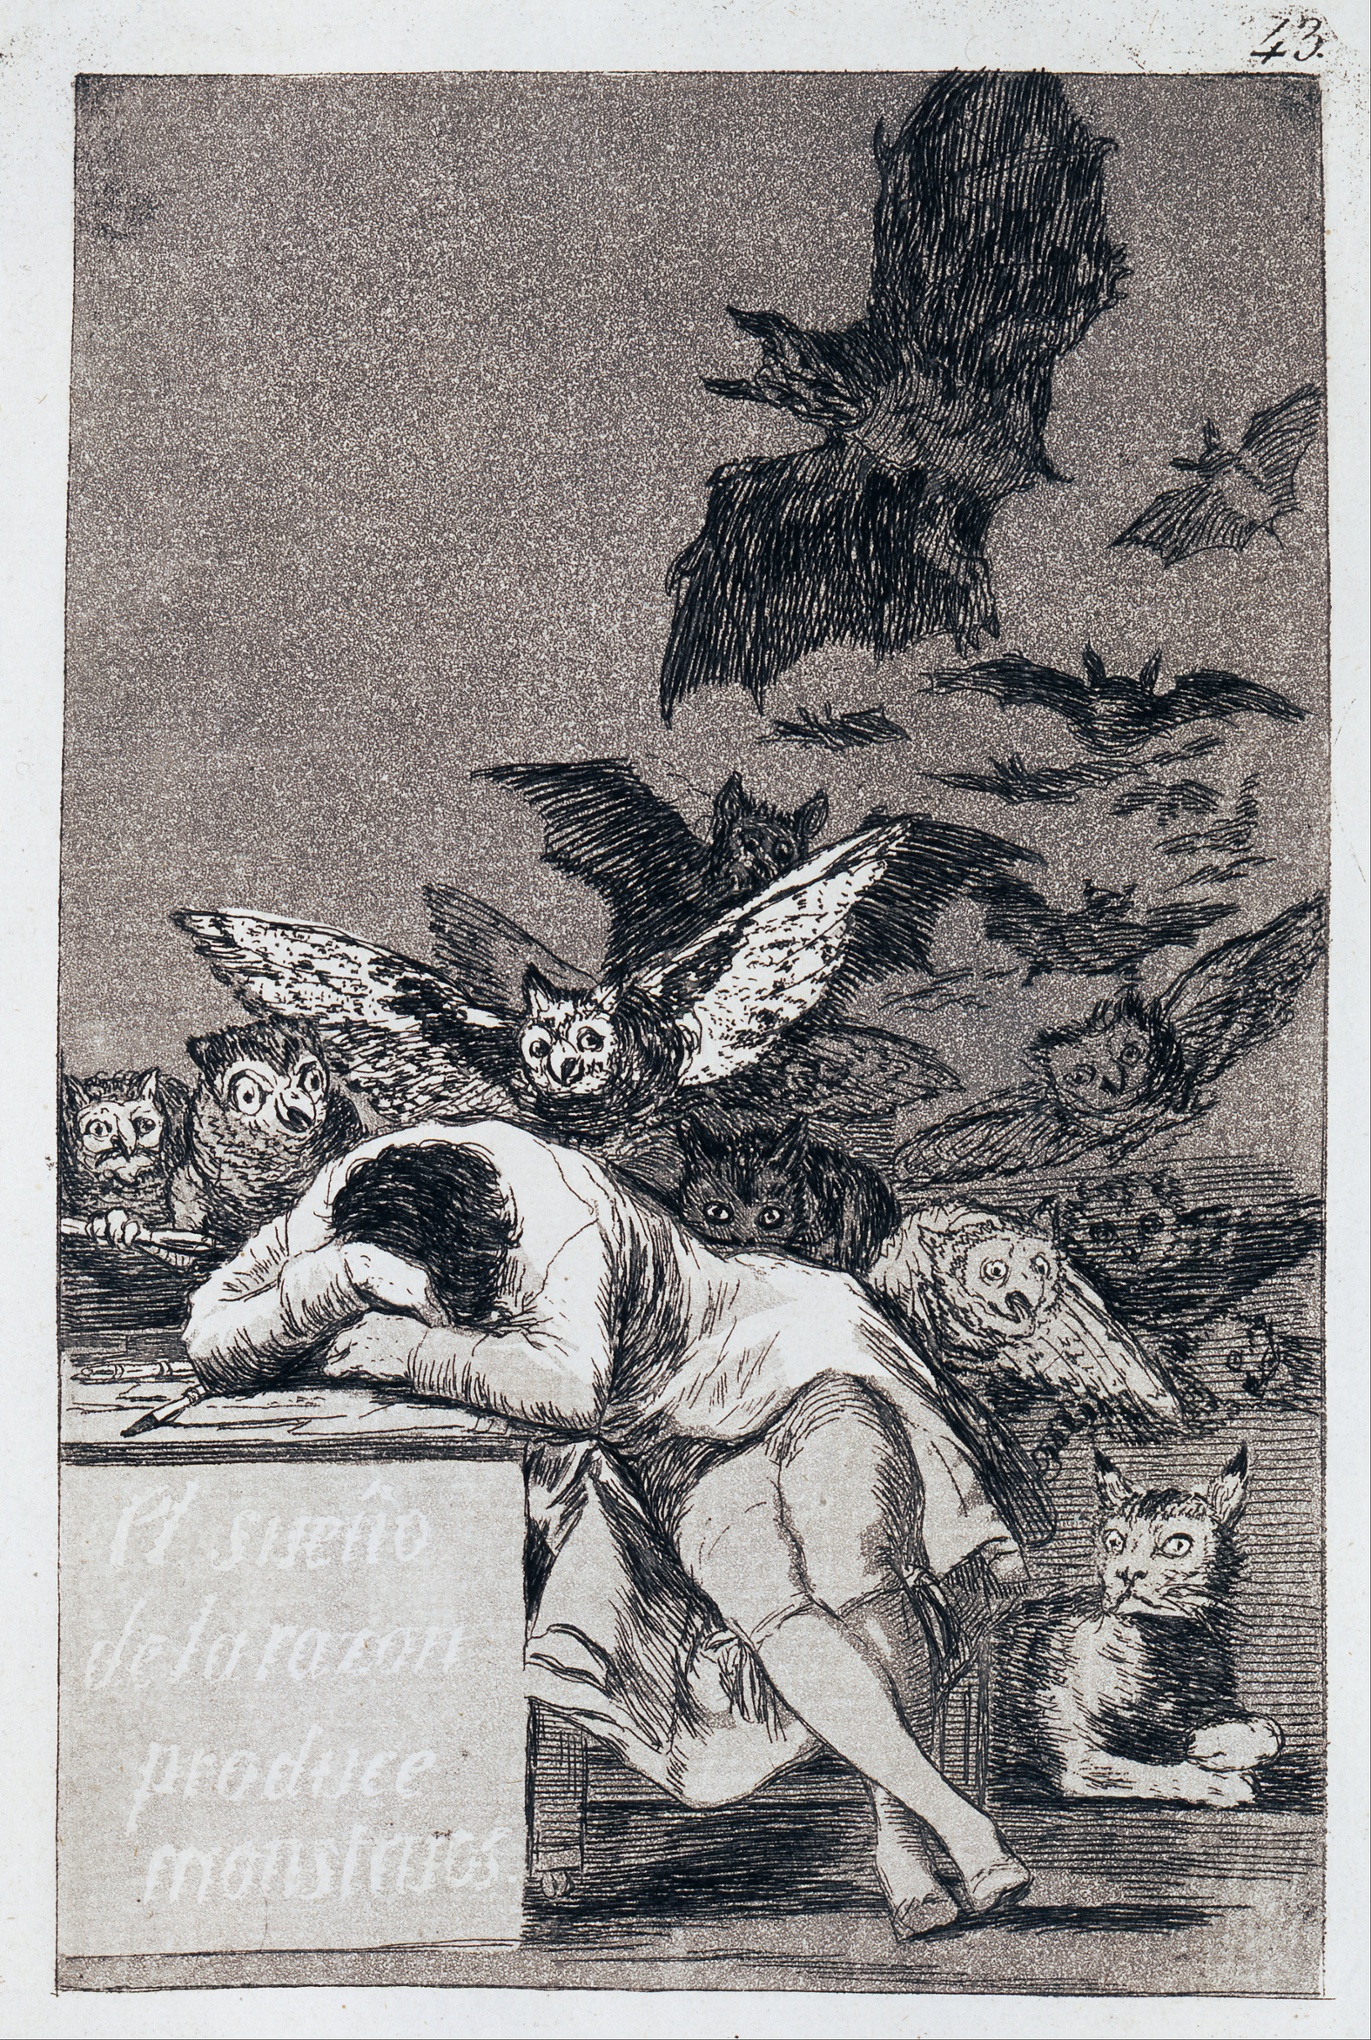 Francisco Goya y Lucientes – The sleep of reason produces monsters (c. 1799)